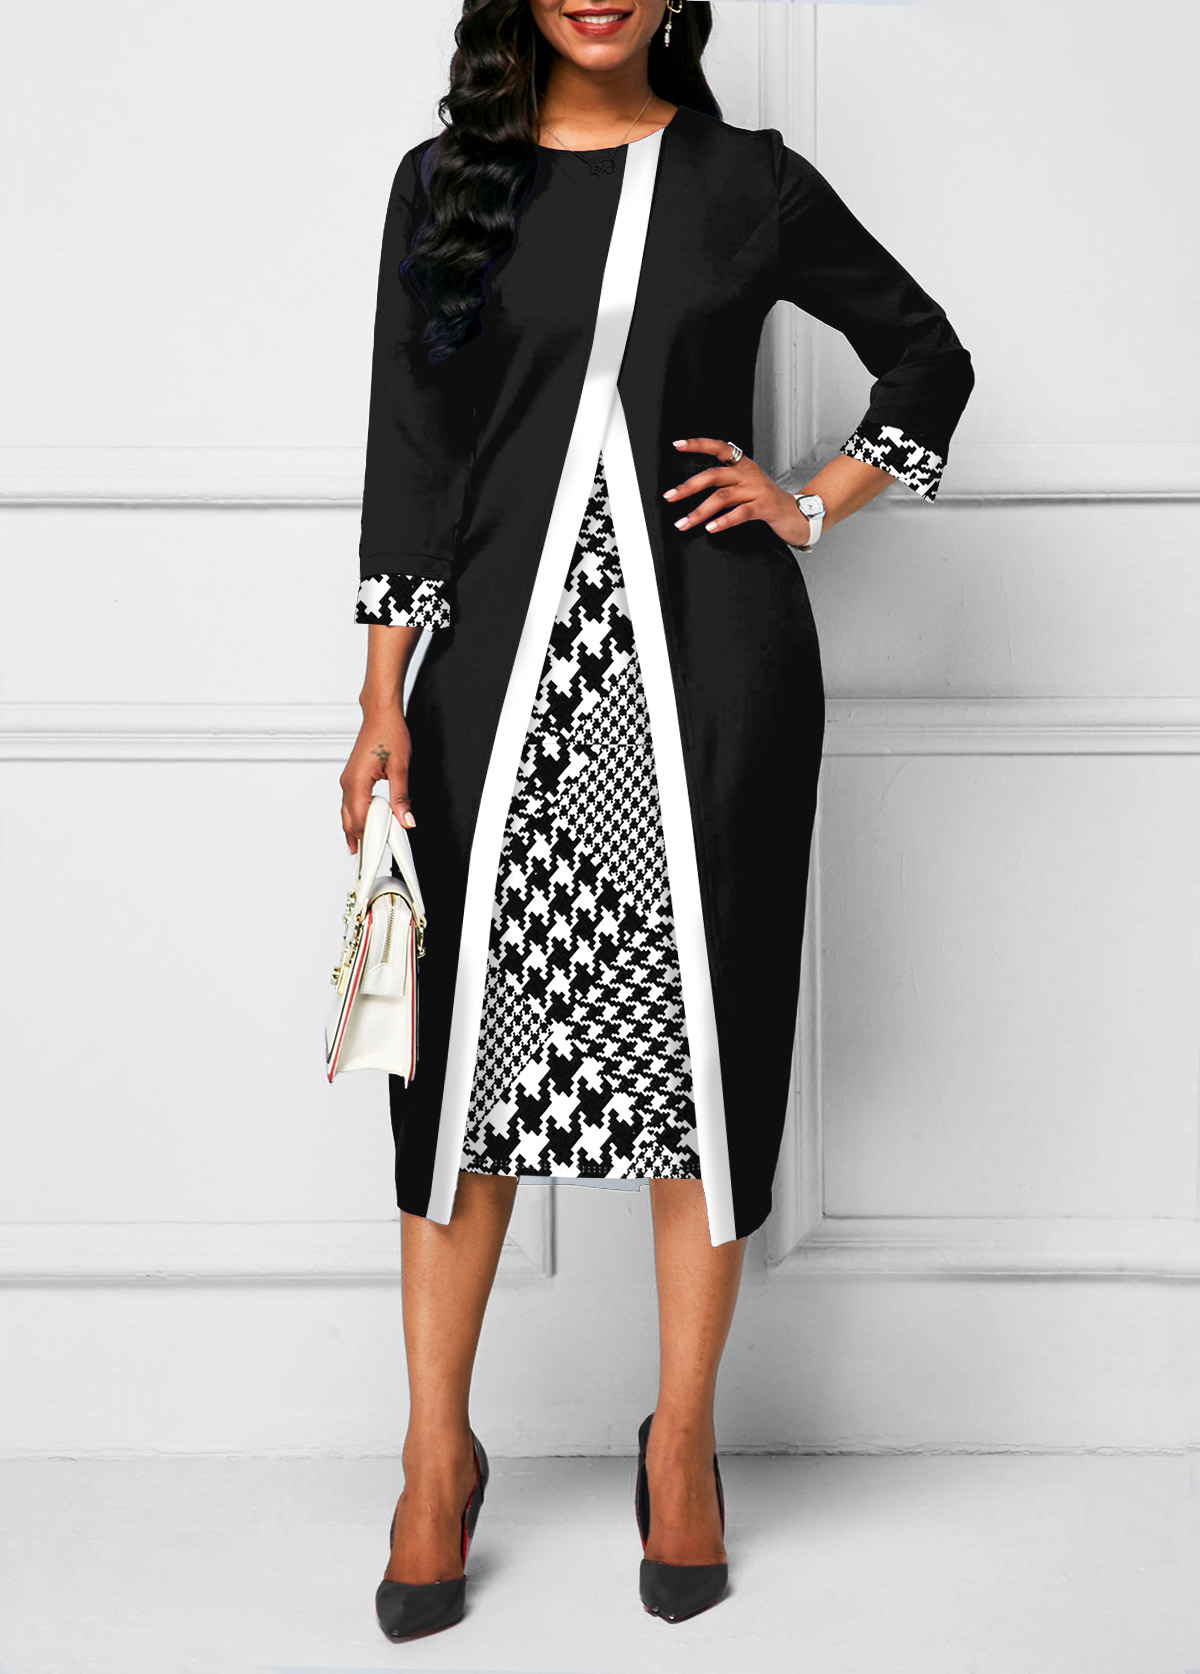 Houndstooth Print Black Faux Two Piece Dress